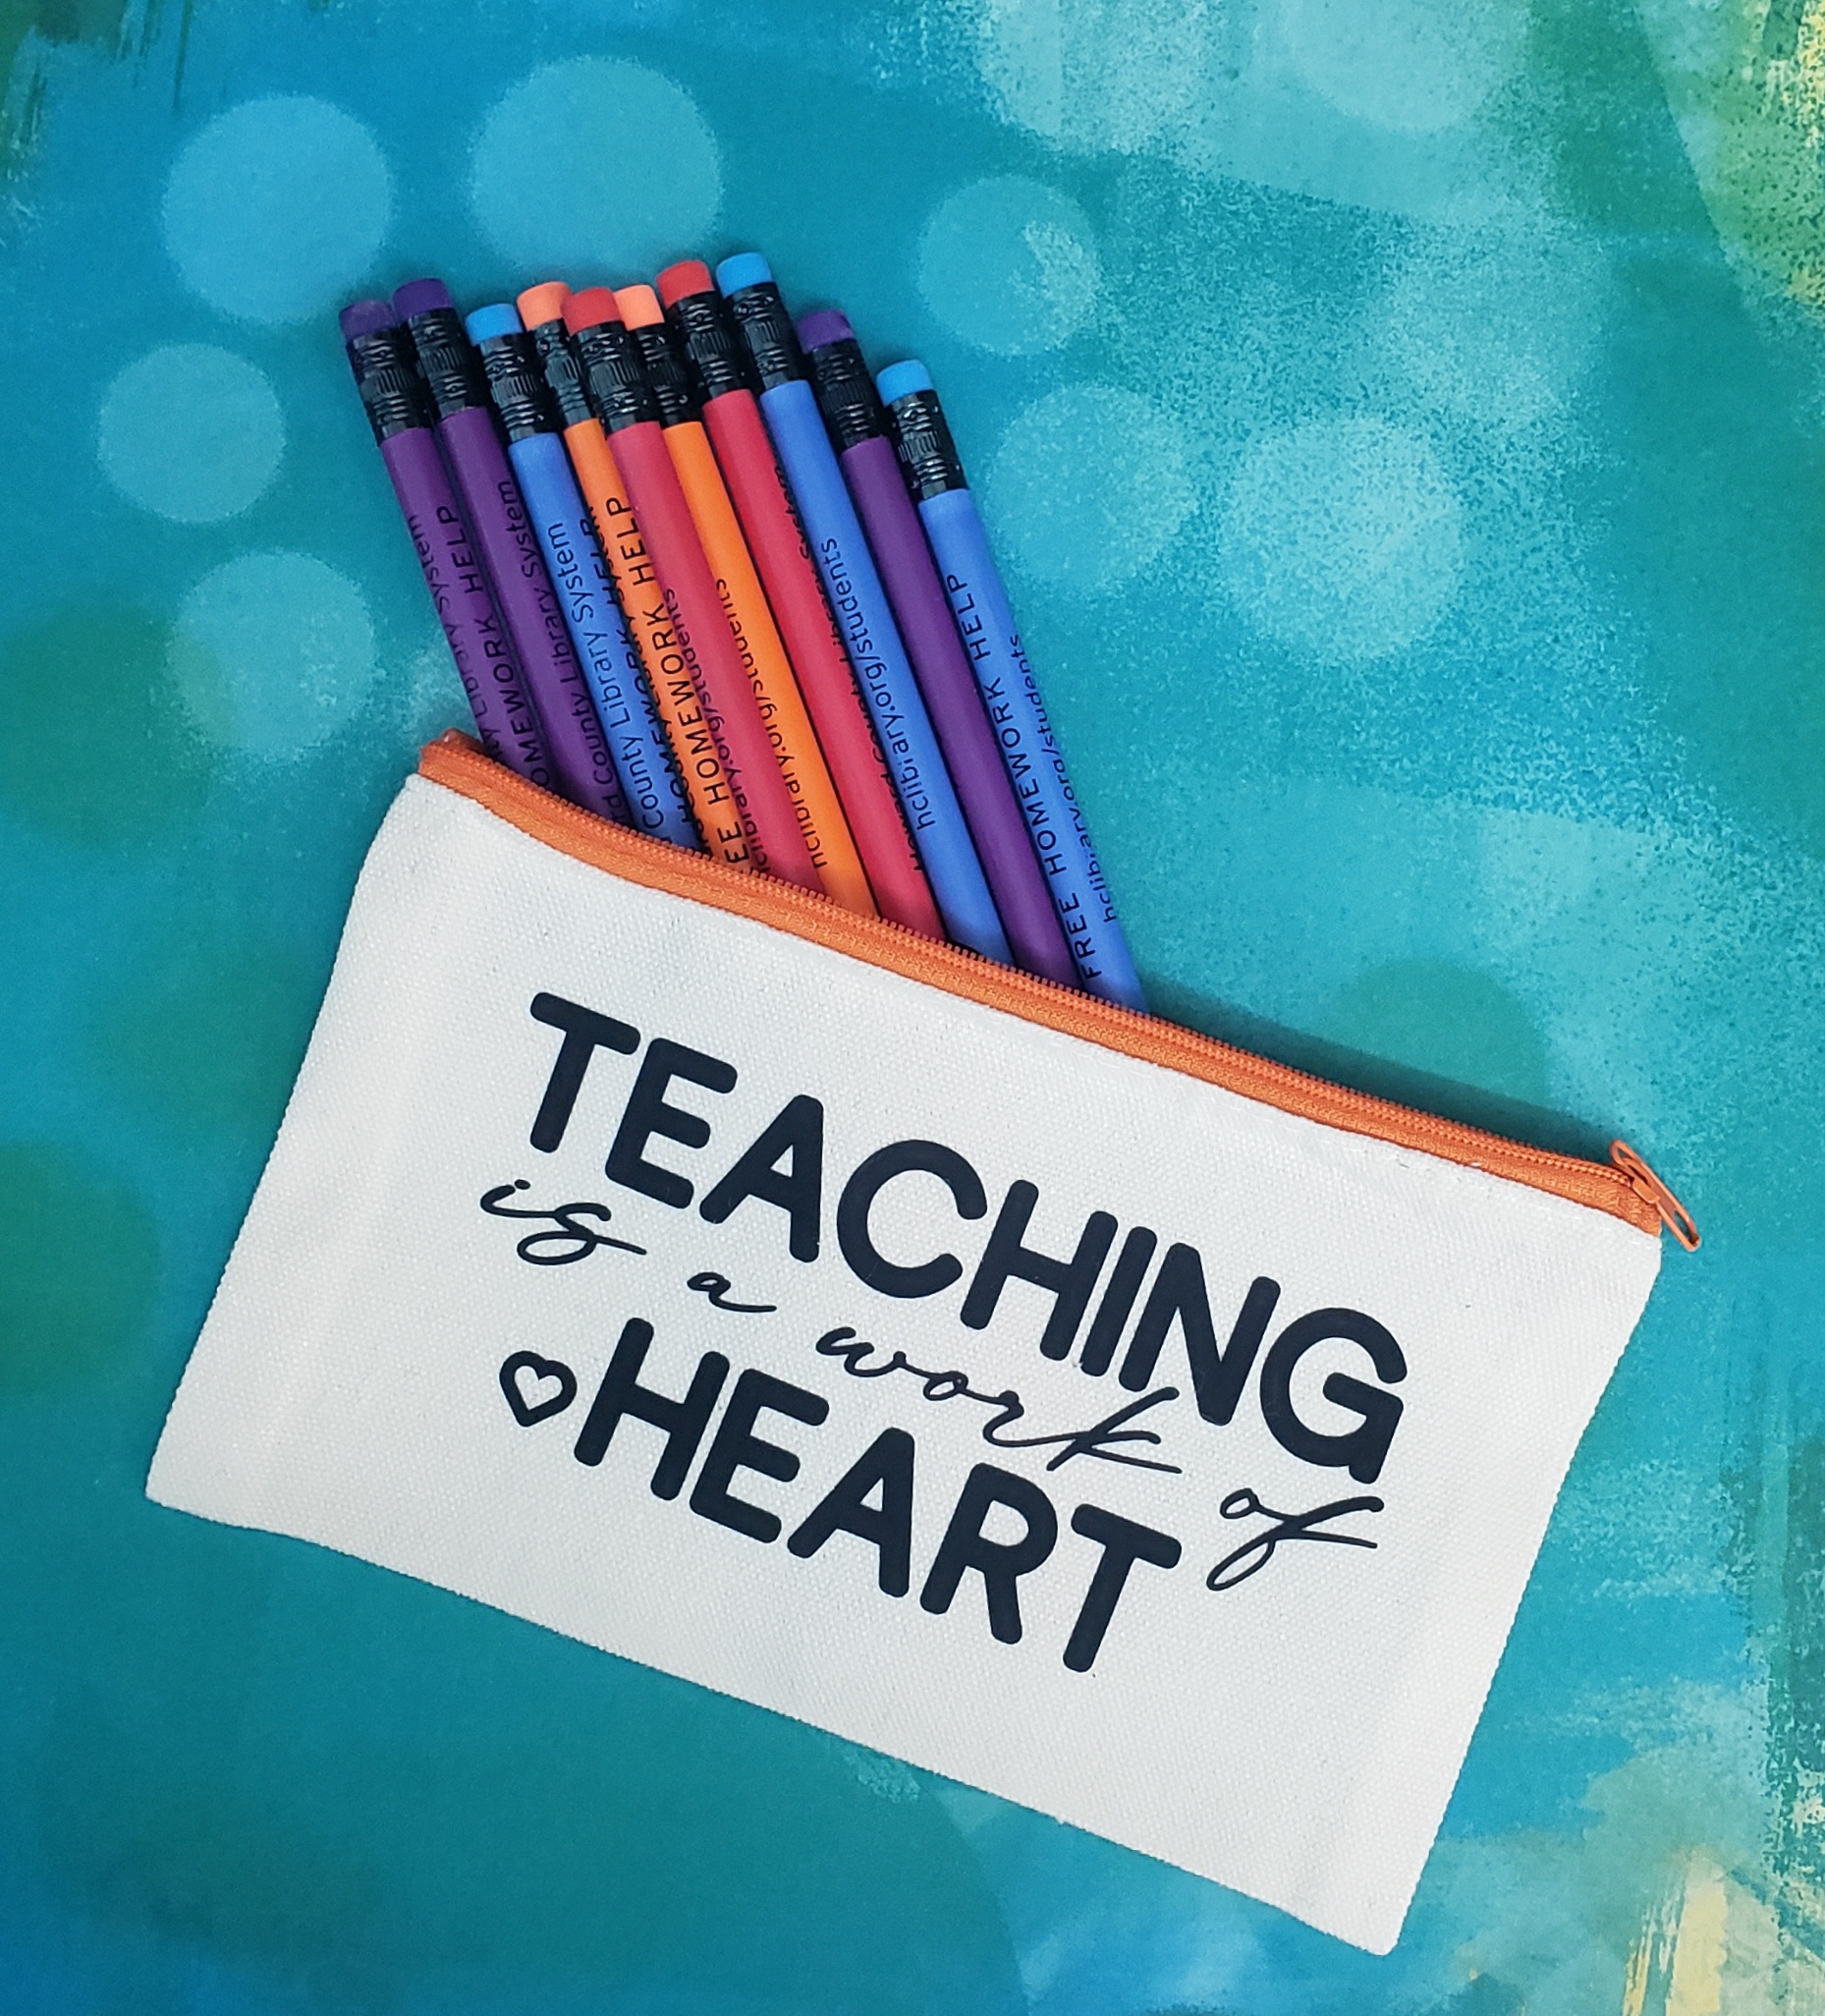 pencil bag with pencils and saying "Teaching is a work of heart"